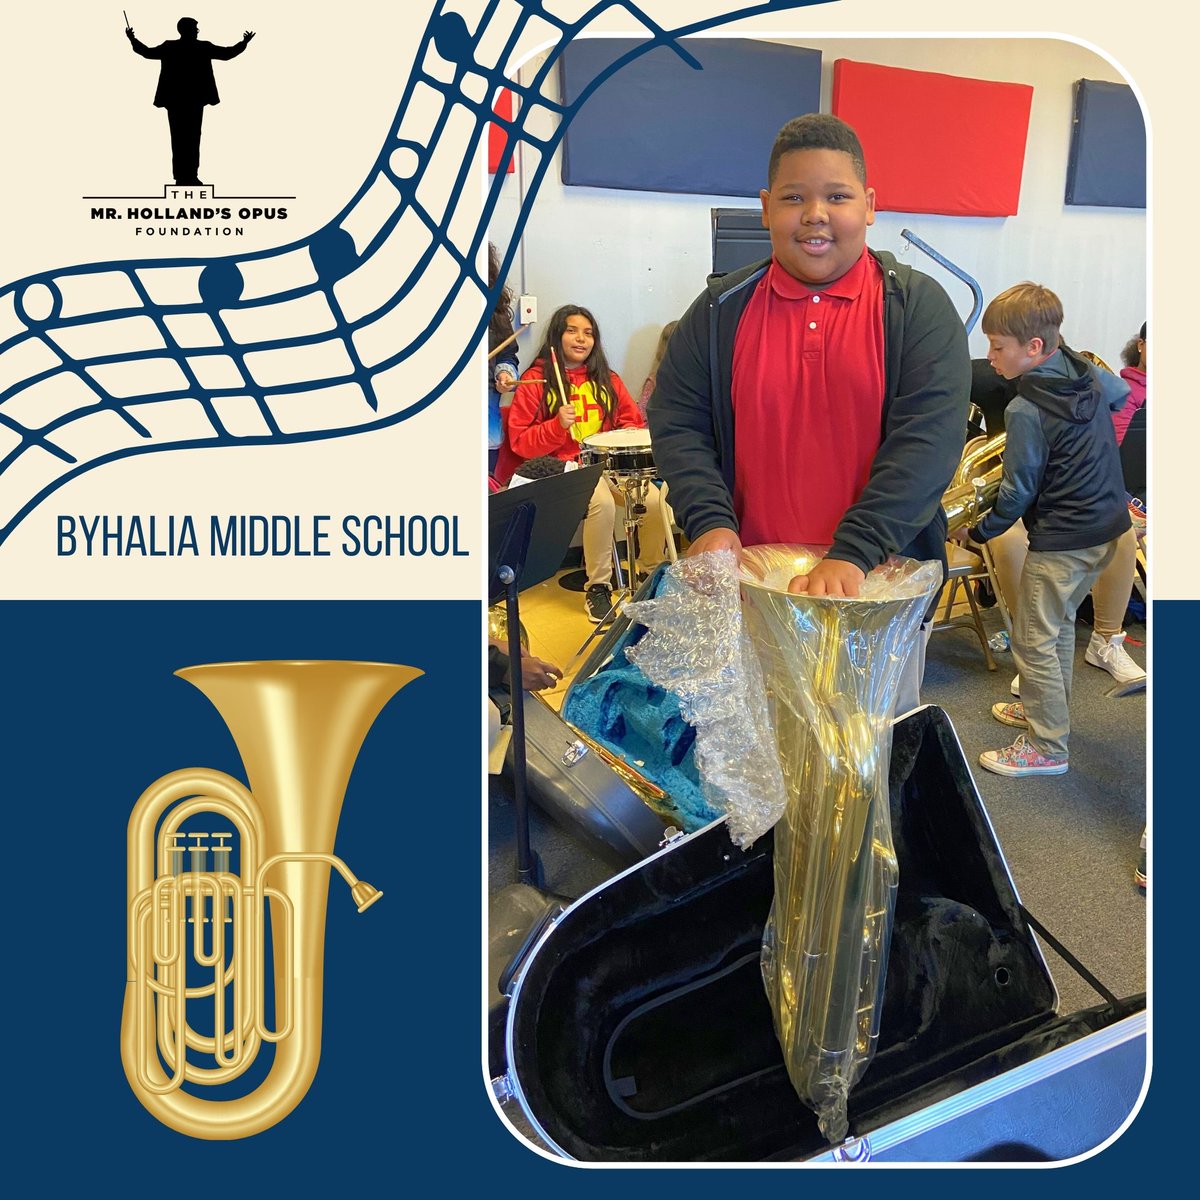 It’s an exciting day at Byhalia Middle School in Byhalia, MS as students unpackage MHOF donated instruments and unleash their potential through the power of music!
#mhof #mhopus #tuba #musiceducation